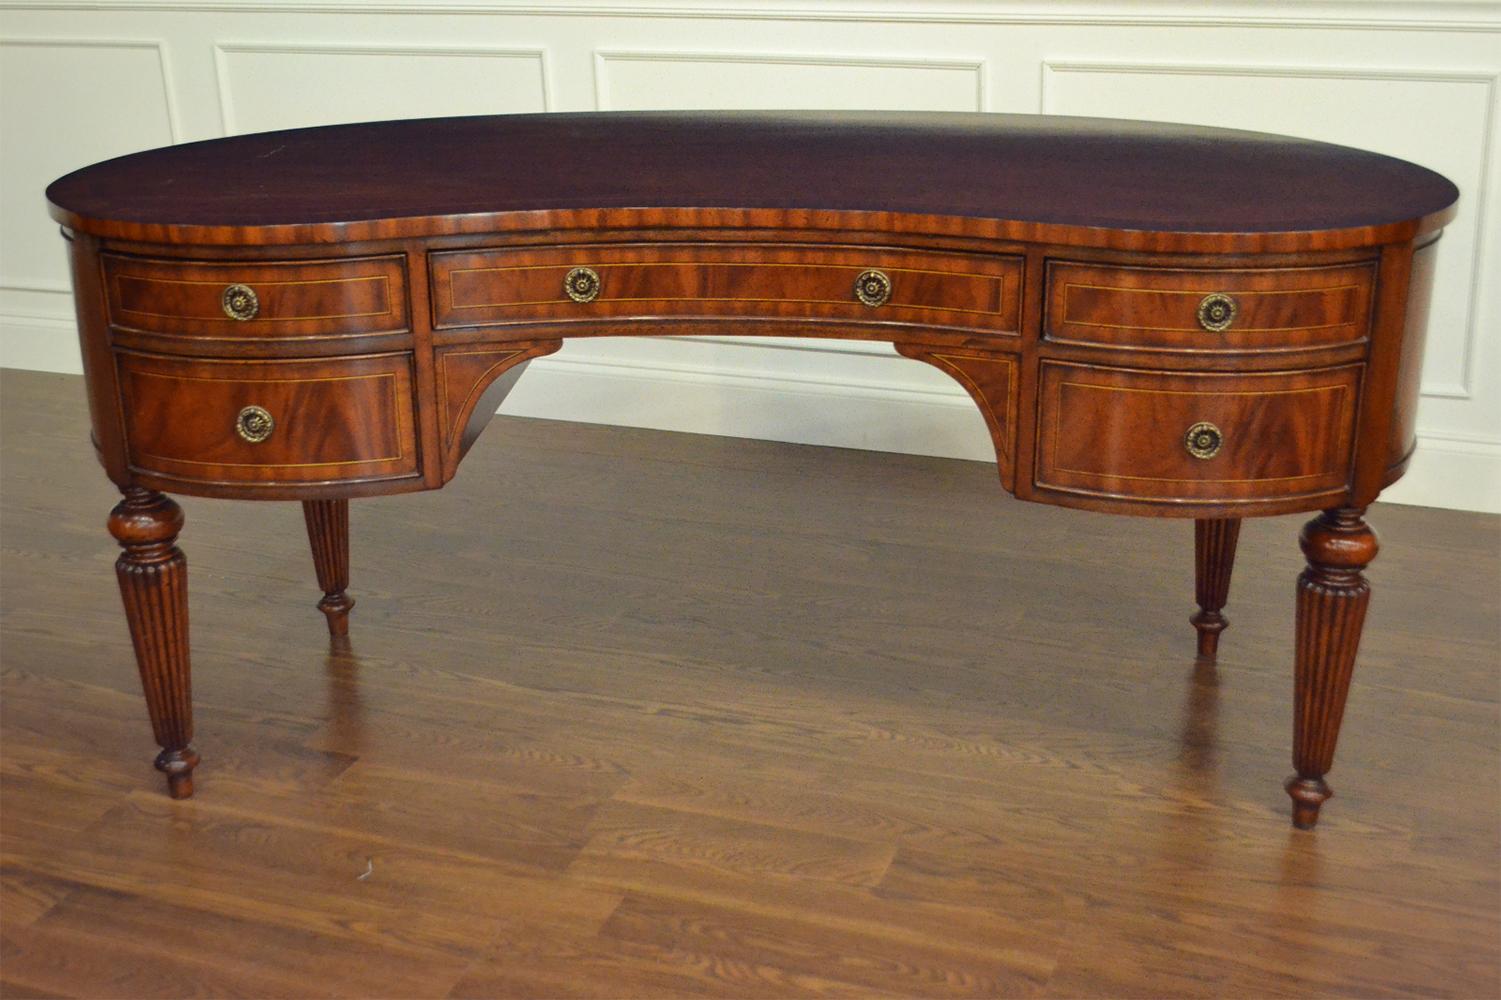 This is a new traditional mahogany library writing desk. Its design was inspired by Sheraton desks from the Regency period and features a kidney shape. The legs are Classic Sheraton style round, fluted and tapered. It also features a top with a